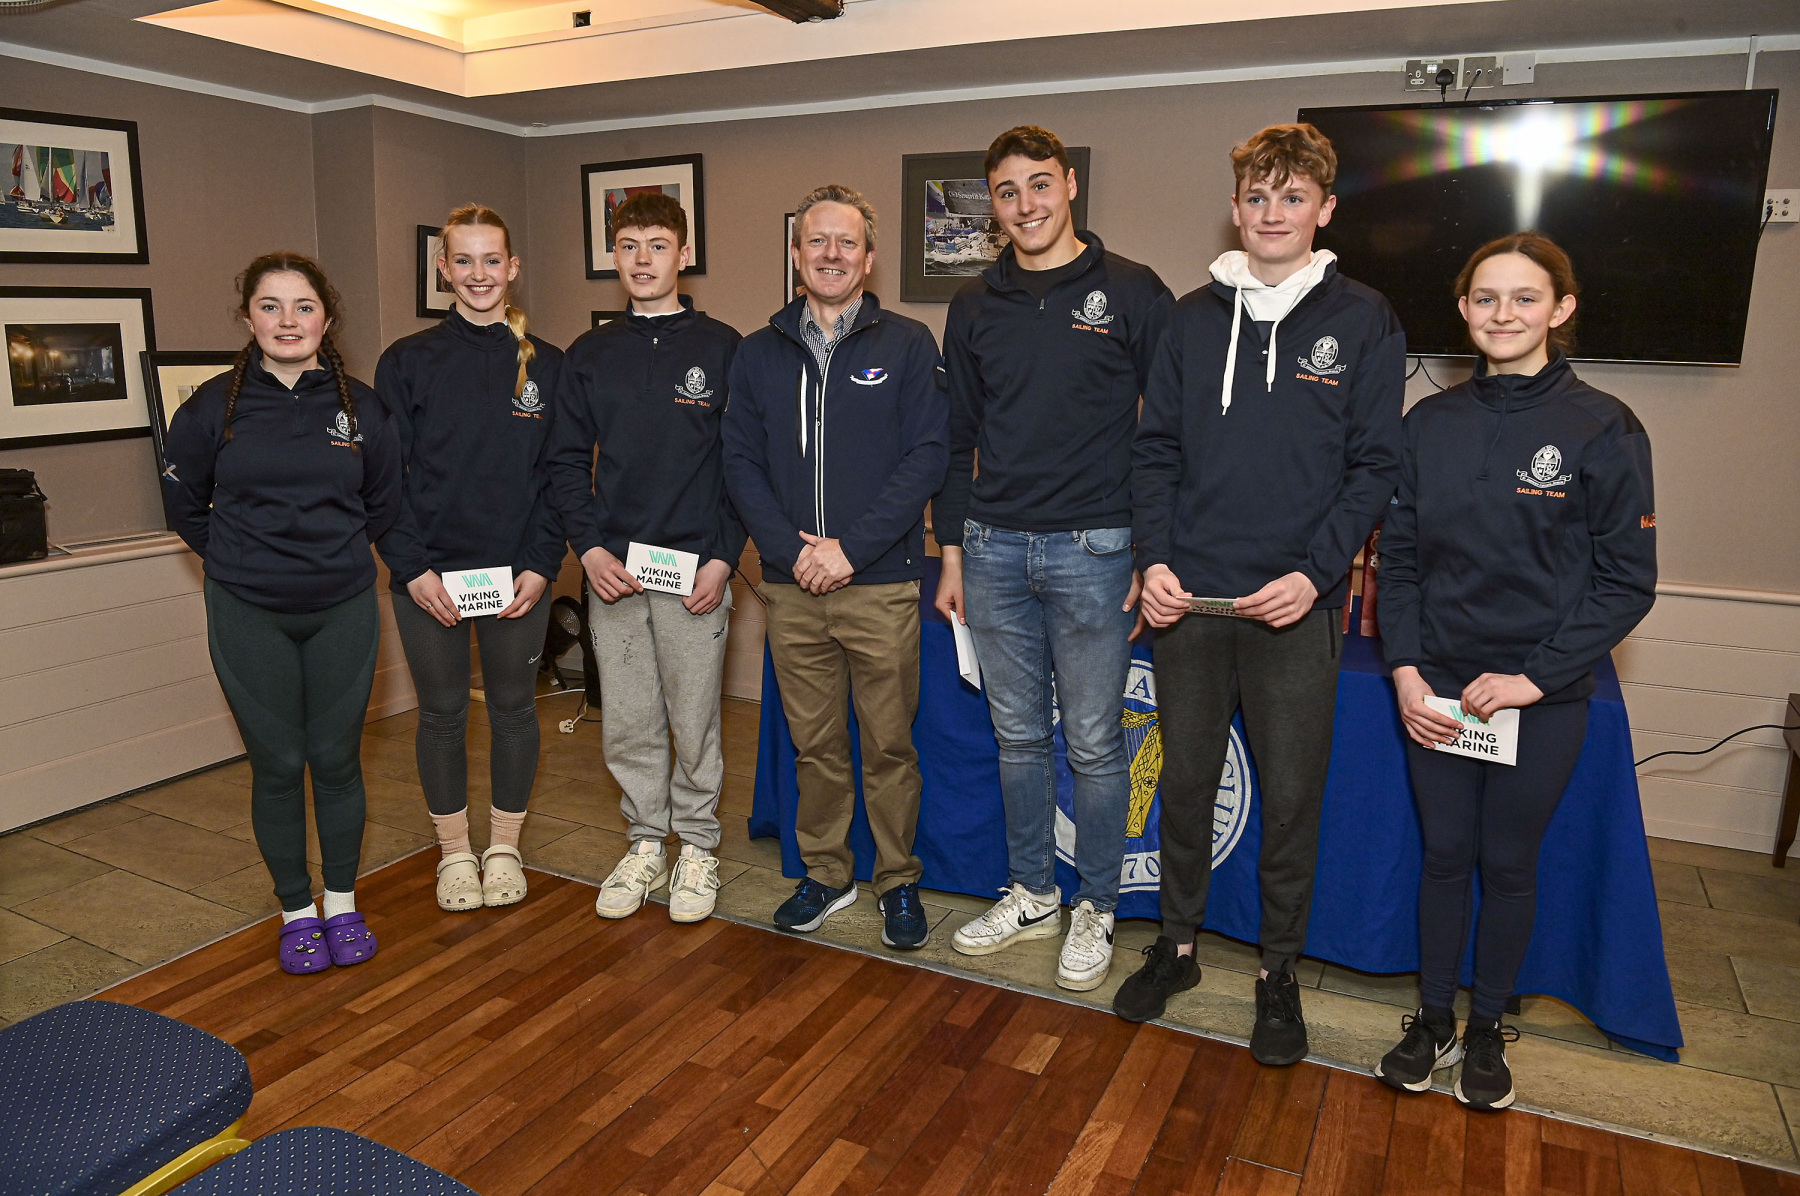 Second Place St Andrews,Commodore NYC Conor O’Regan, with Kei Walker - Eva Barcroft - Rachel Flood Natasha Johnson, Peter Williams and Sam legg 

“The Leinster Schools Team Racing Championships 2023 sponsored by Viking Marine”
****NO Reproduction Fee ******
Pic © Michael Chester
0878072295
info@chester.ie